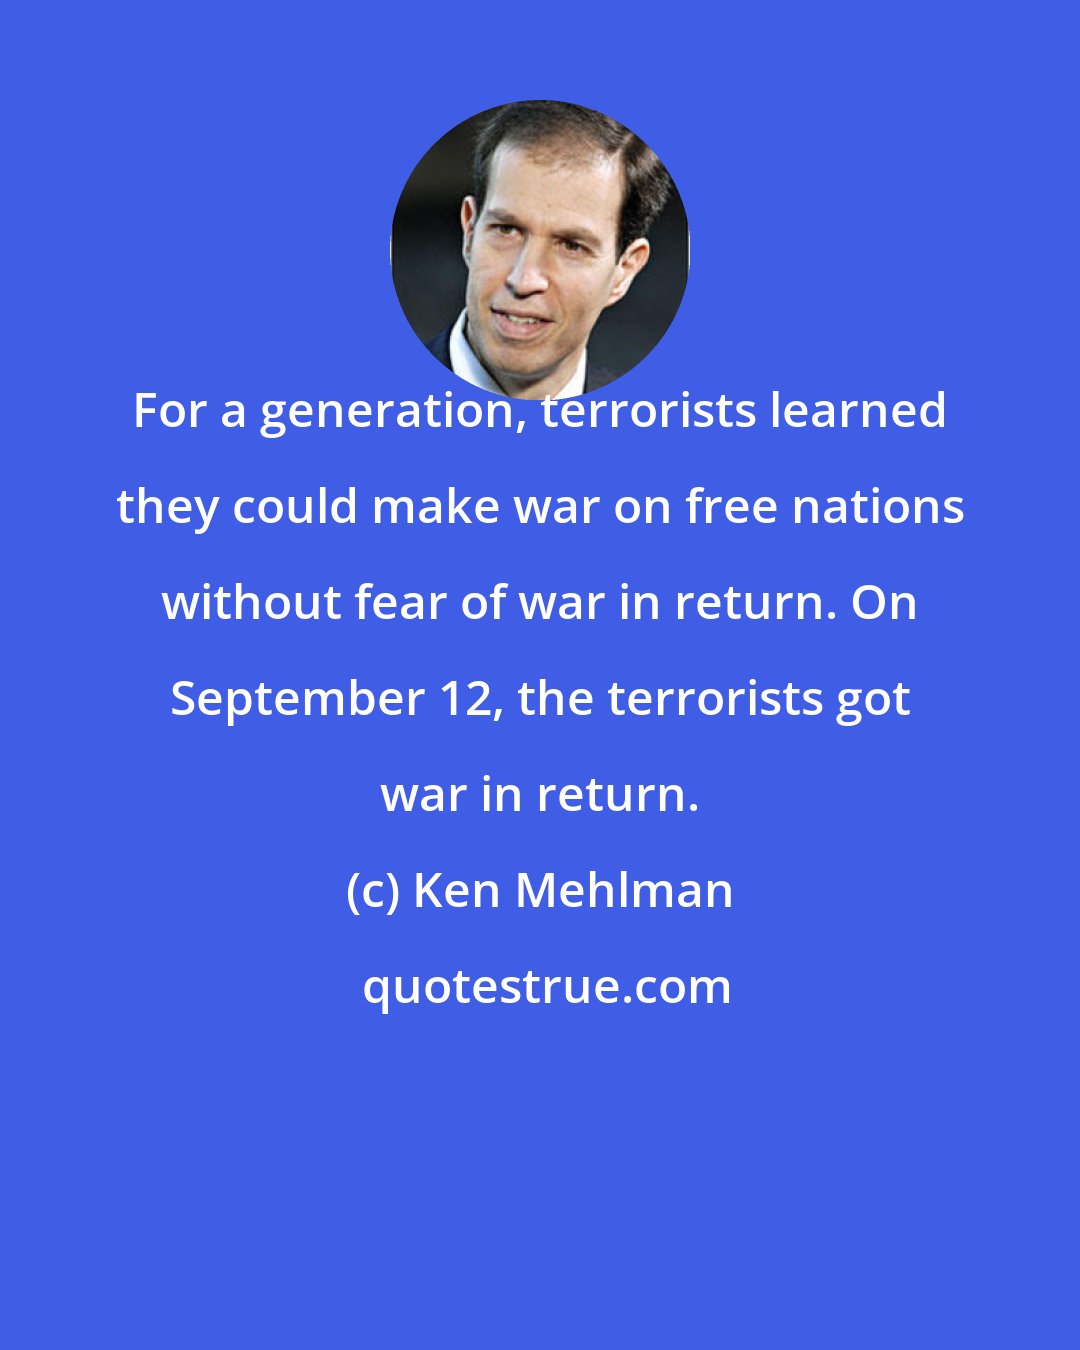 Ken Mehlman: For a generation, terrorists learned they could make war on free nations without fear of war in return. On September 12, the terrorists got war in return.